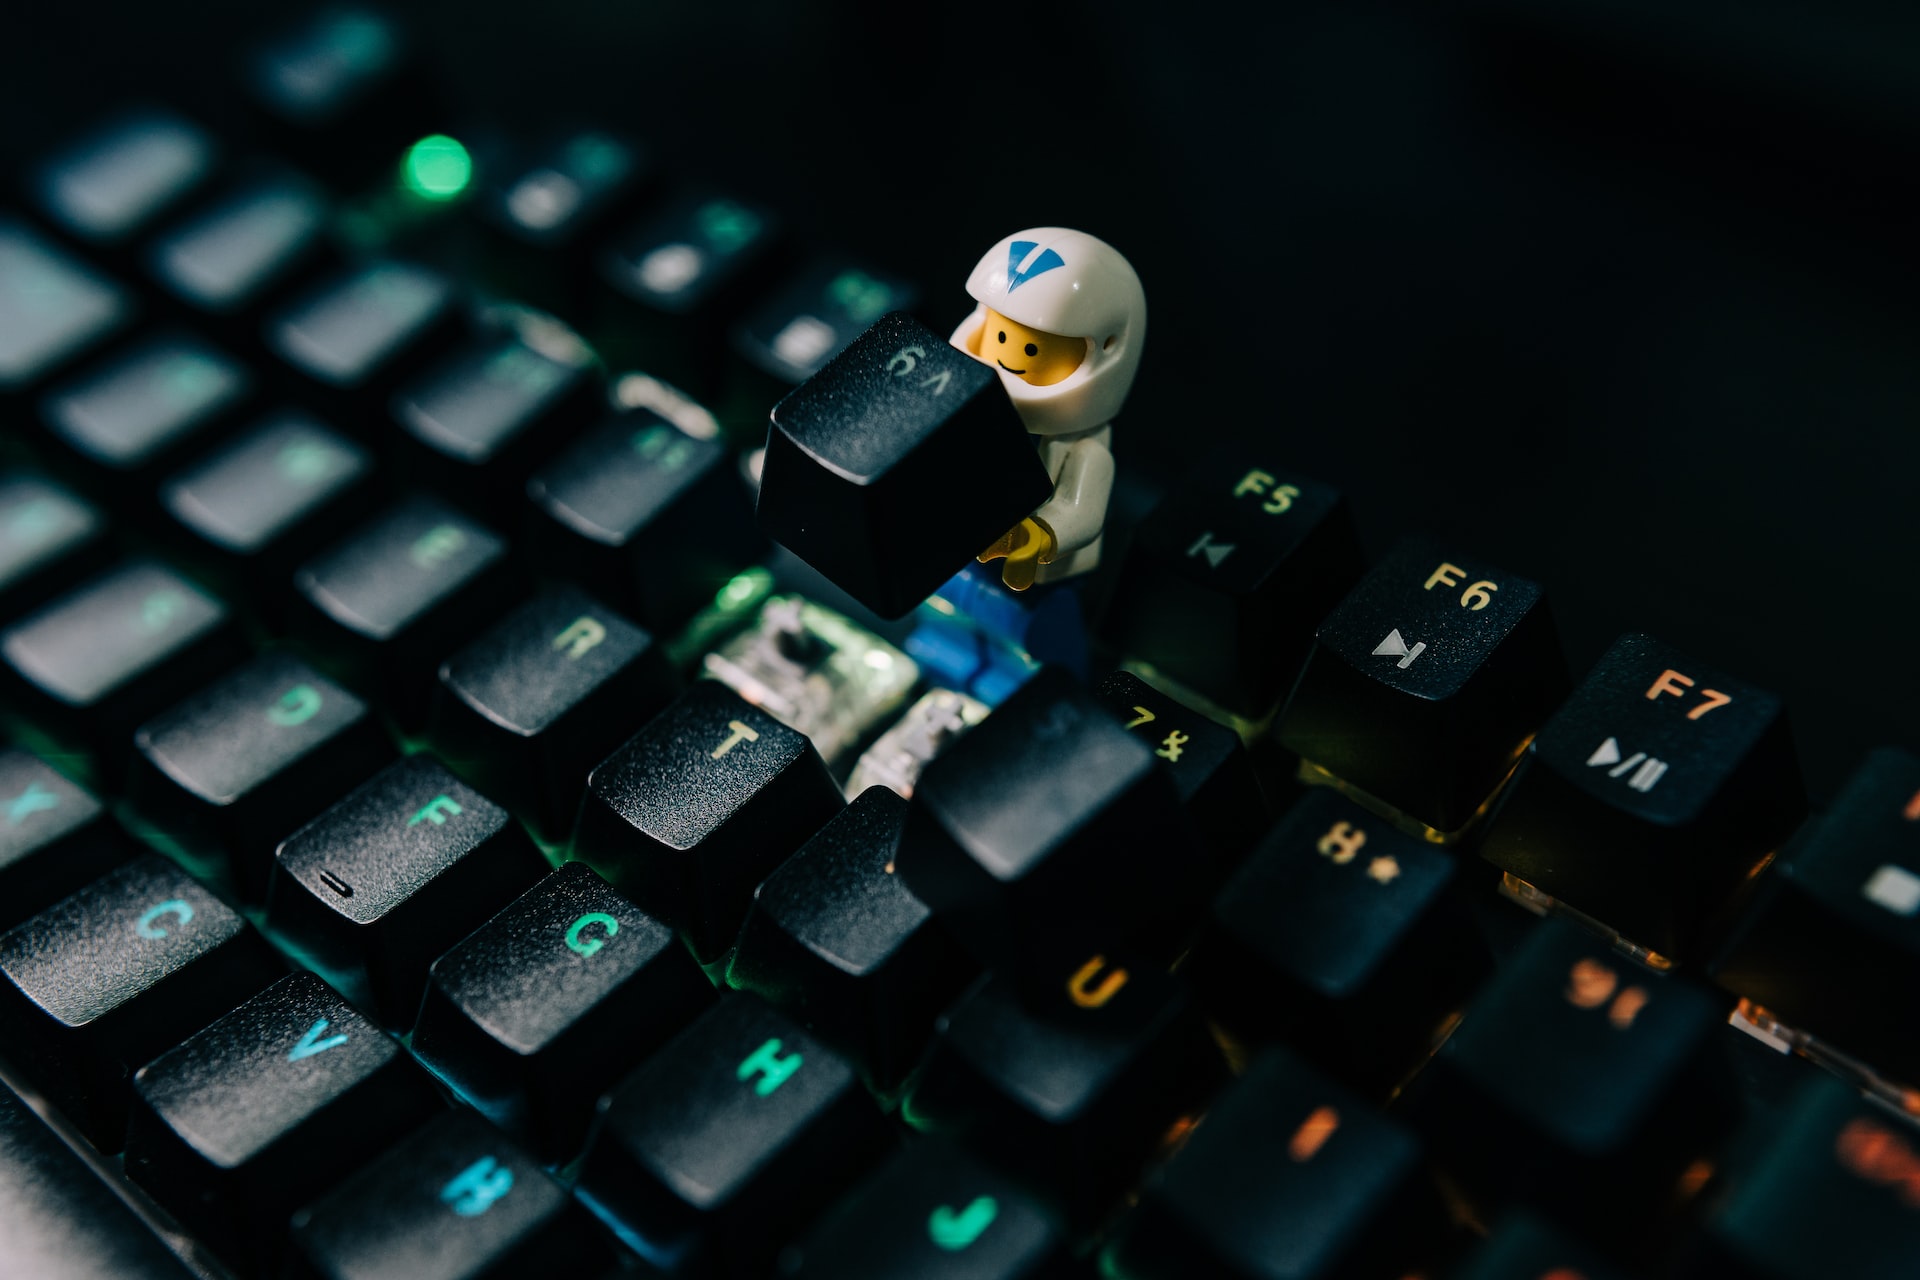 A small lego astronaut replacing the ^ key.